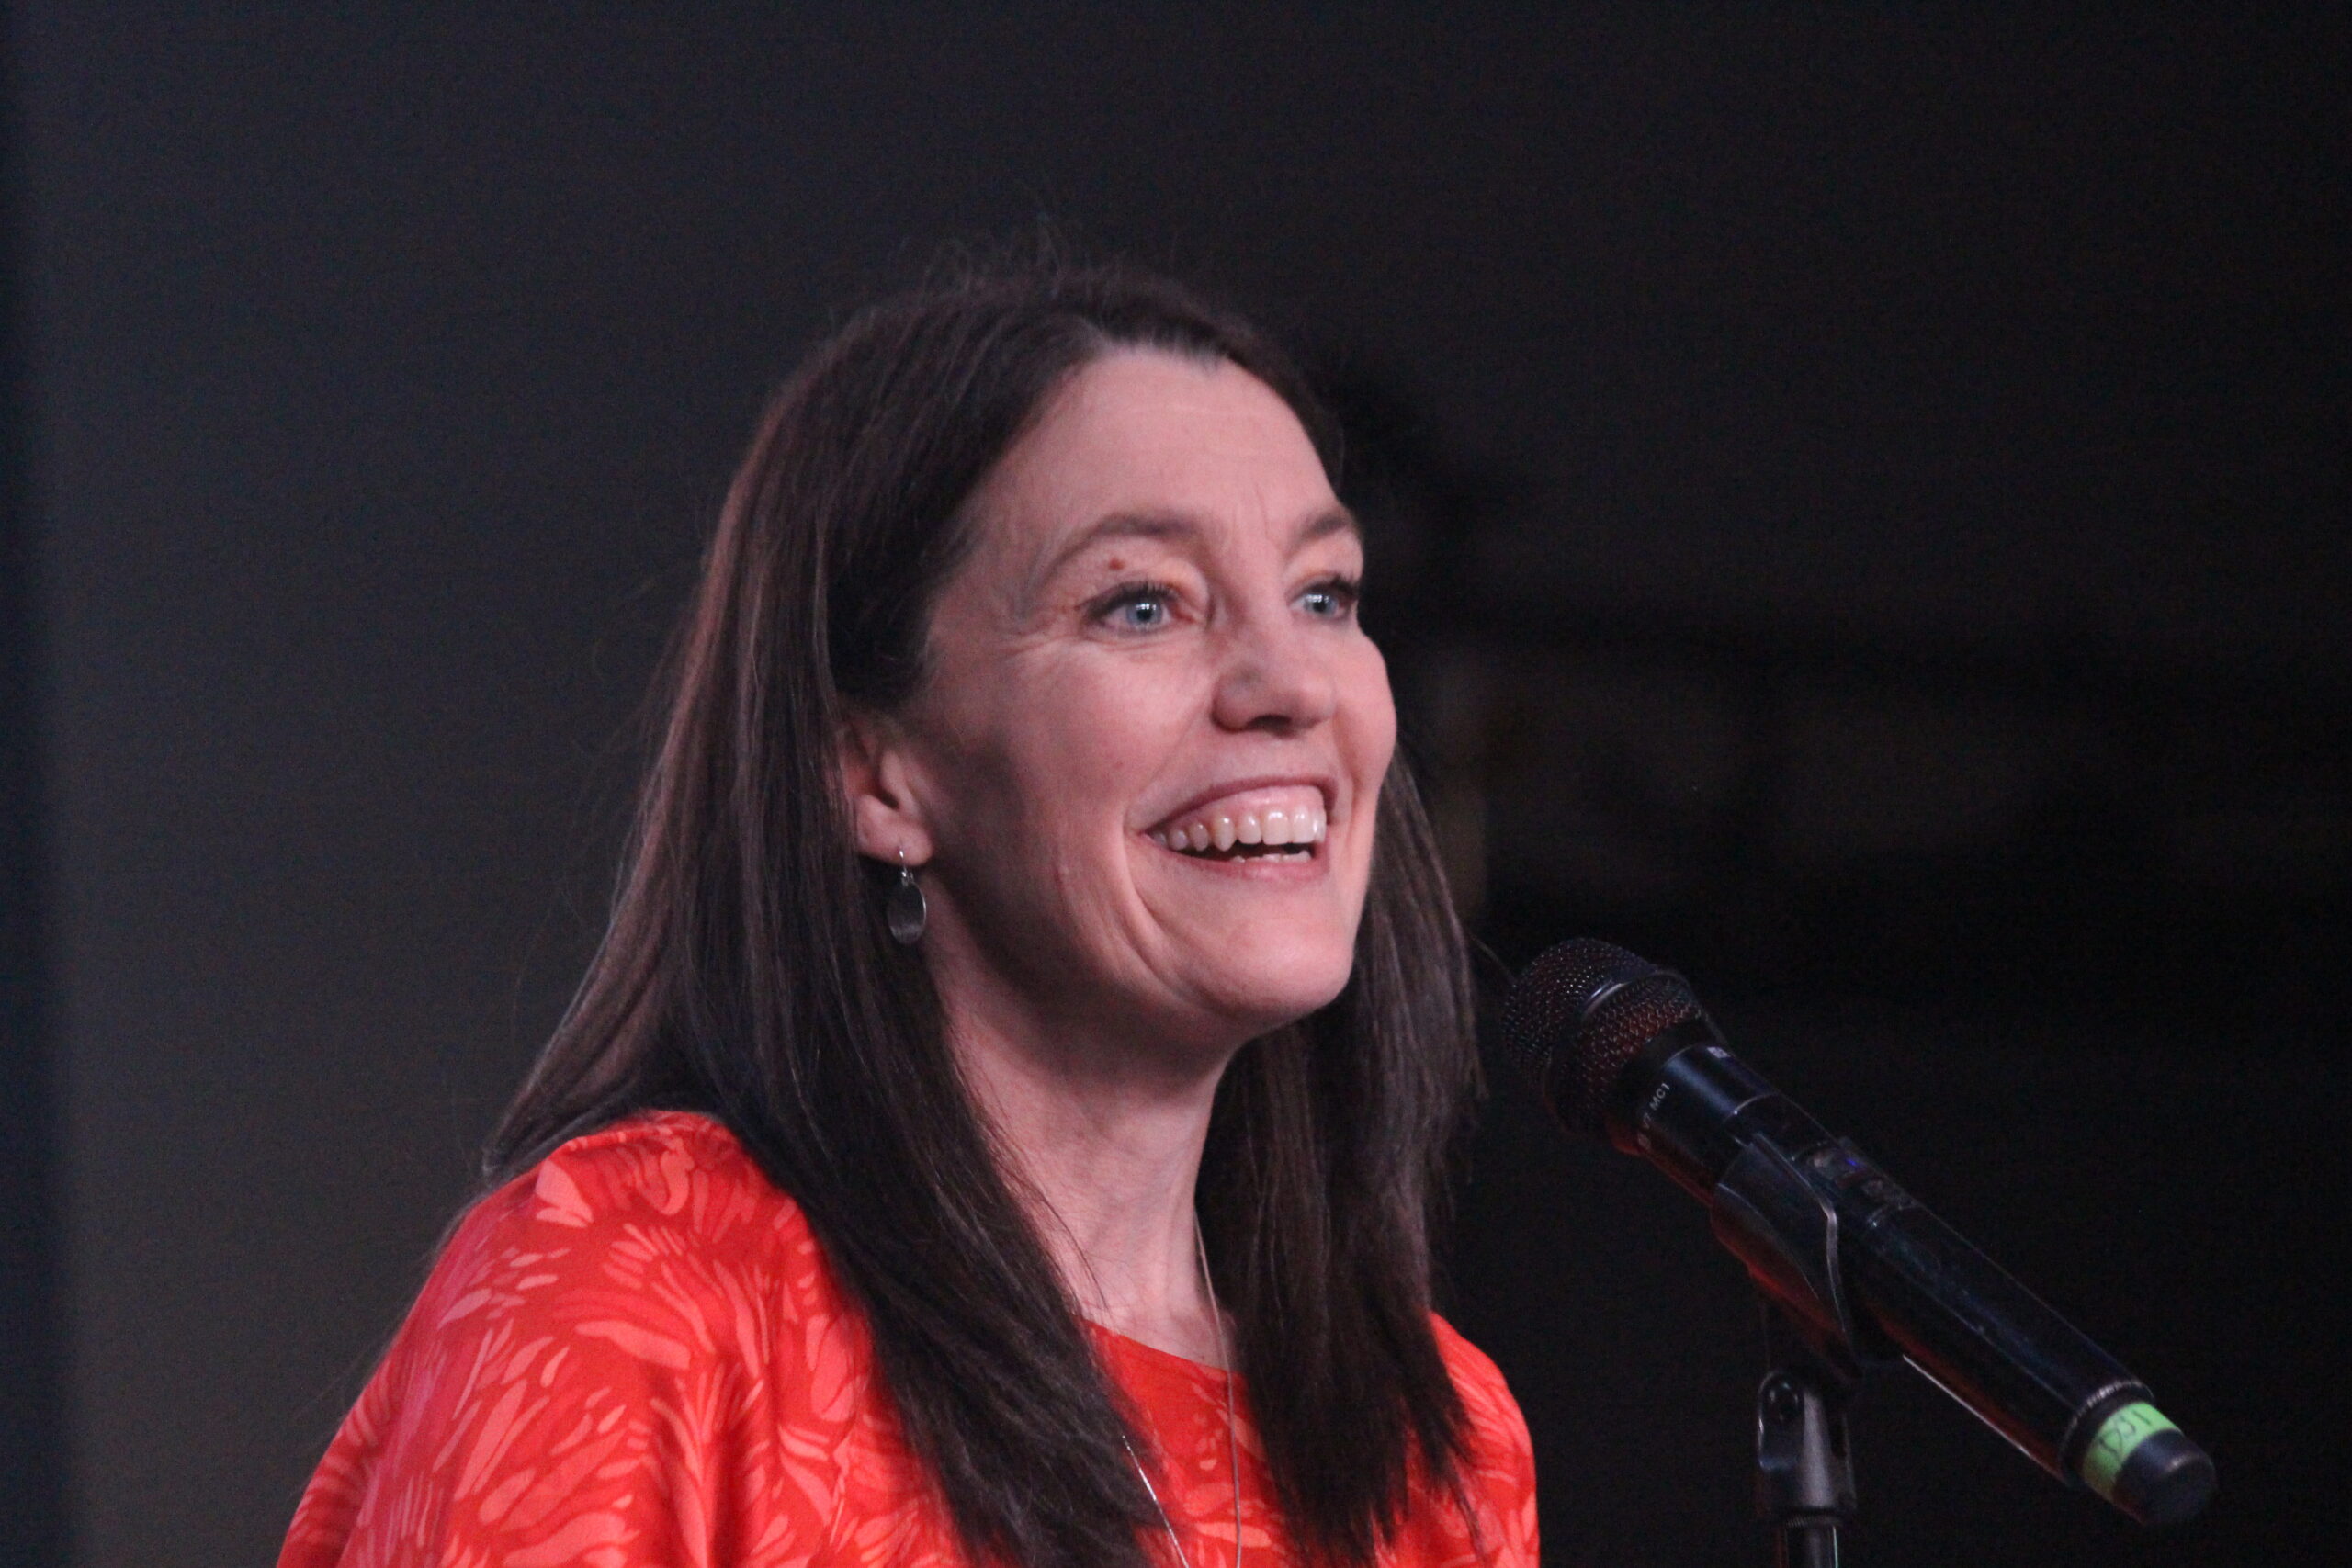 a woman in red speaks at a microphone